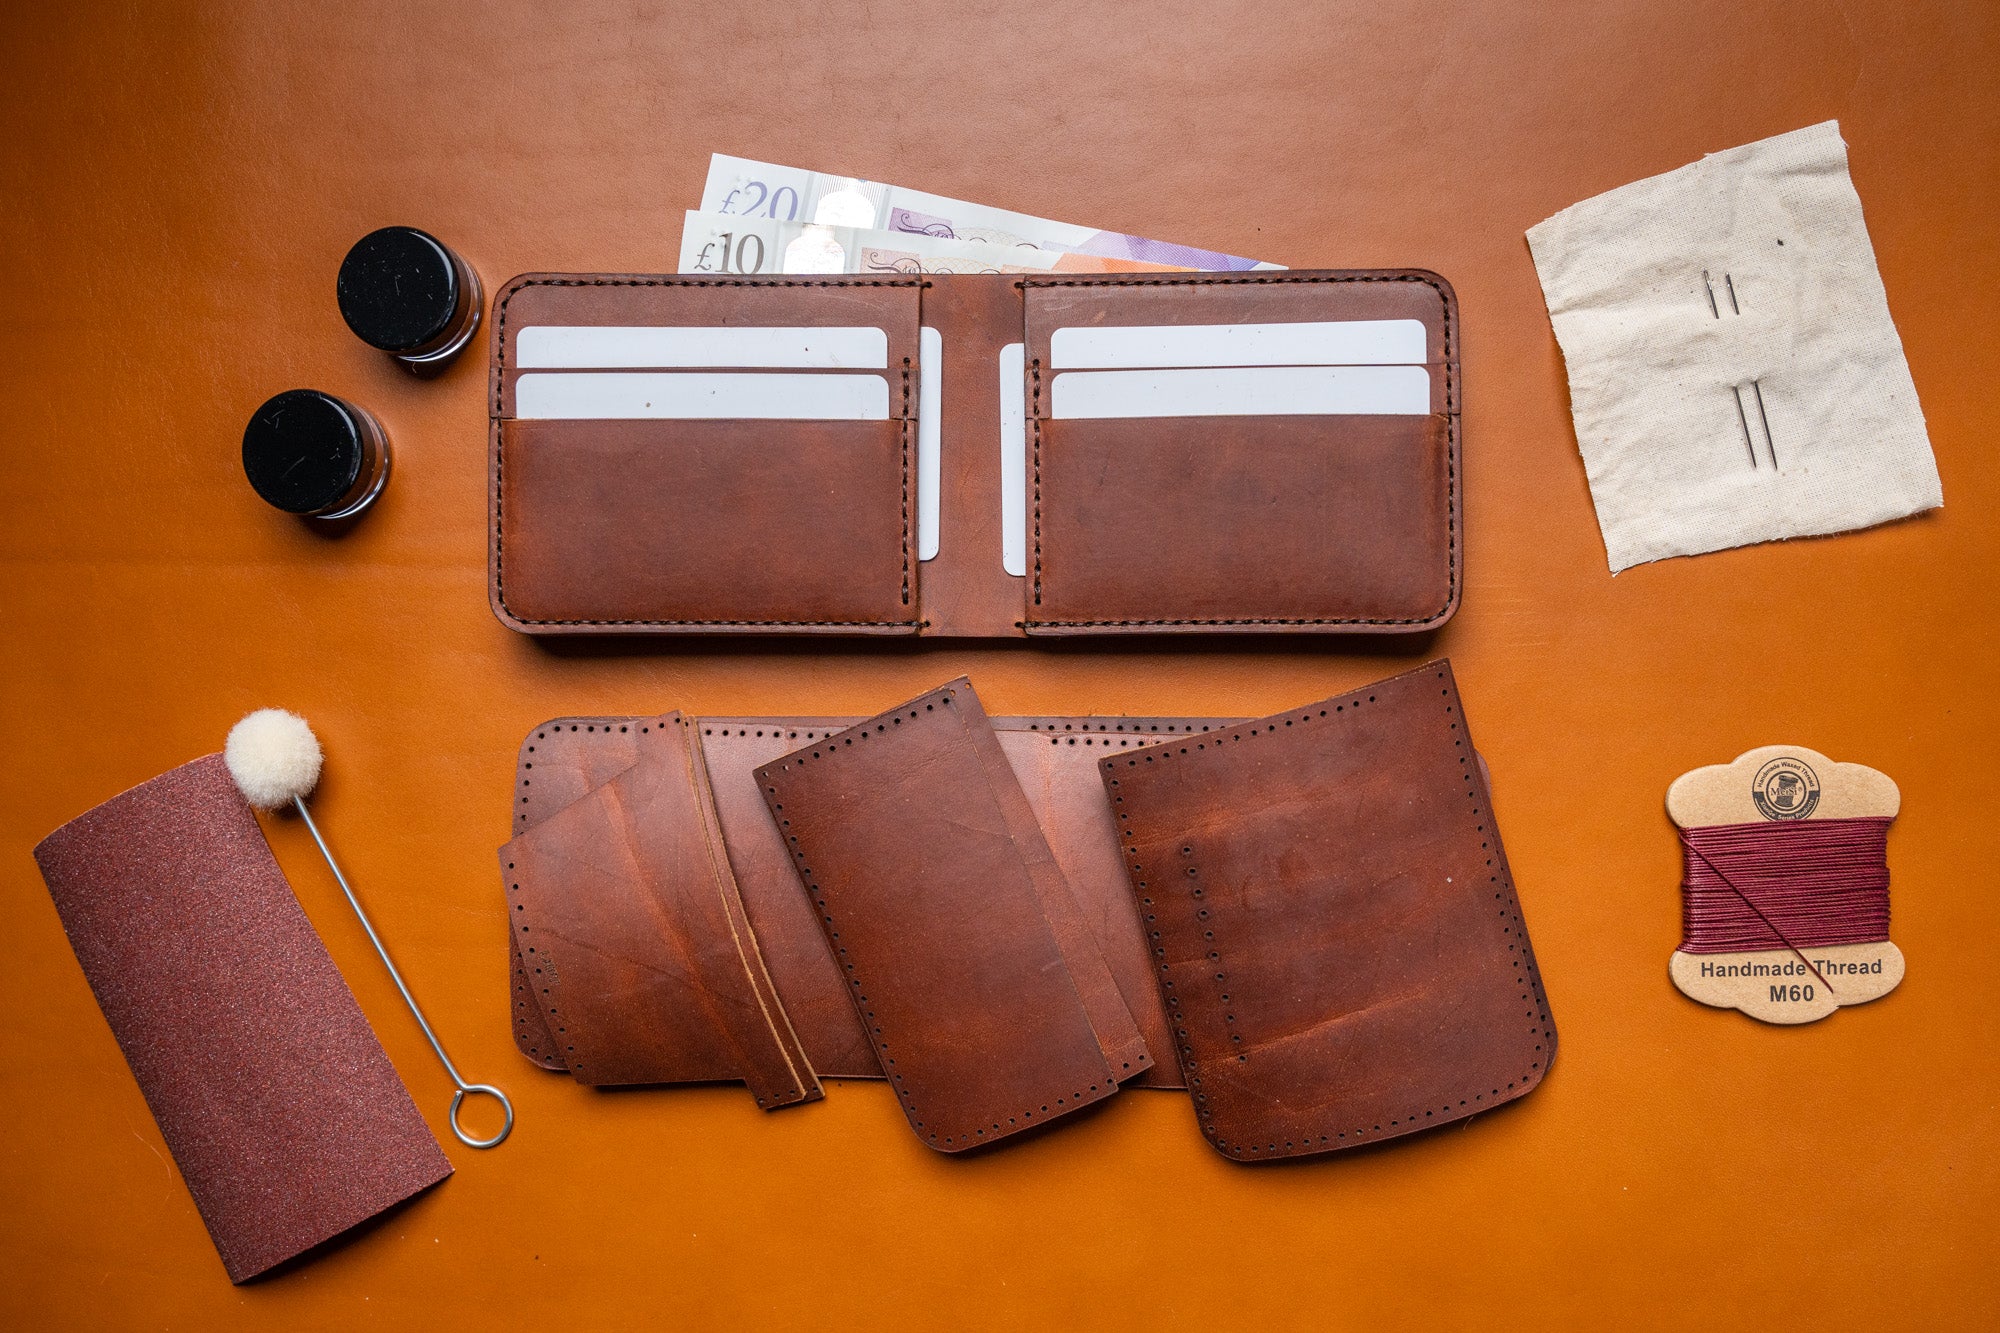 New Passport Cover Design – Workshop After Six - Handcrafted Leather Goods